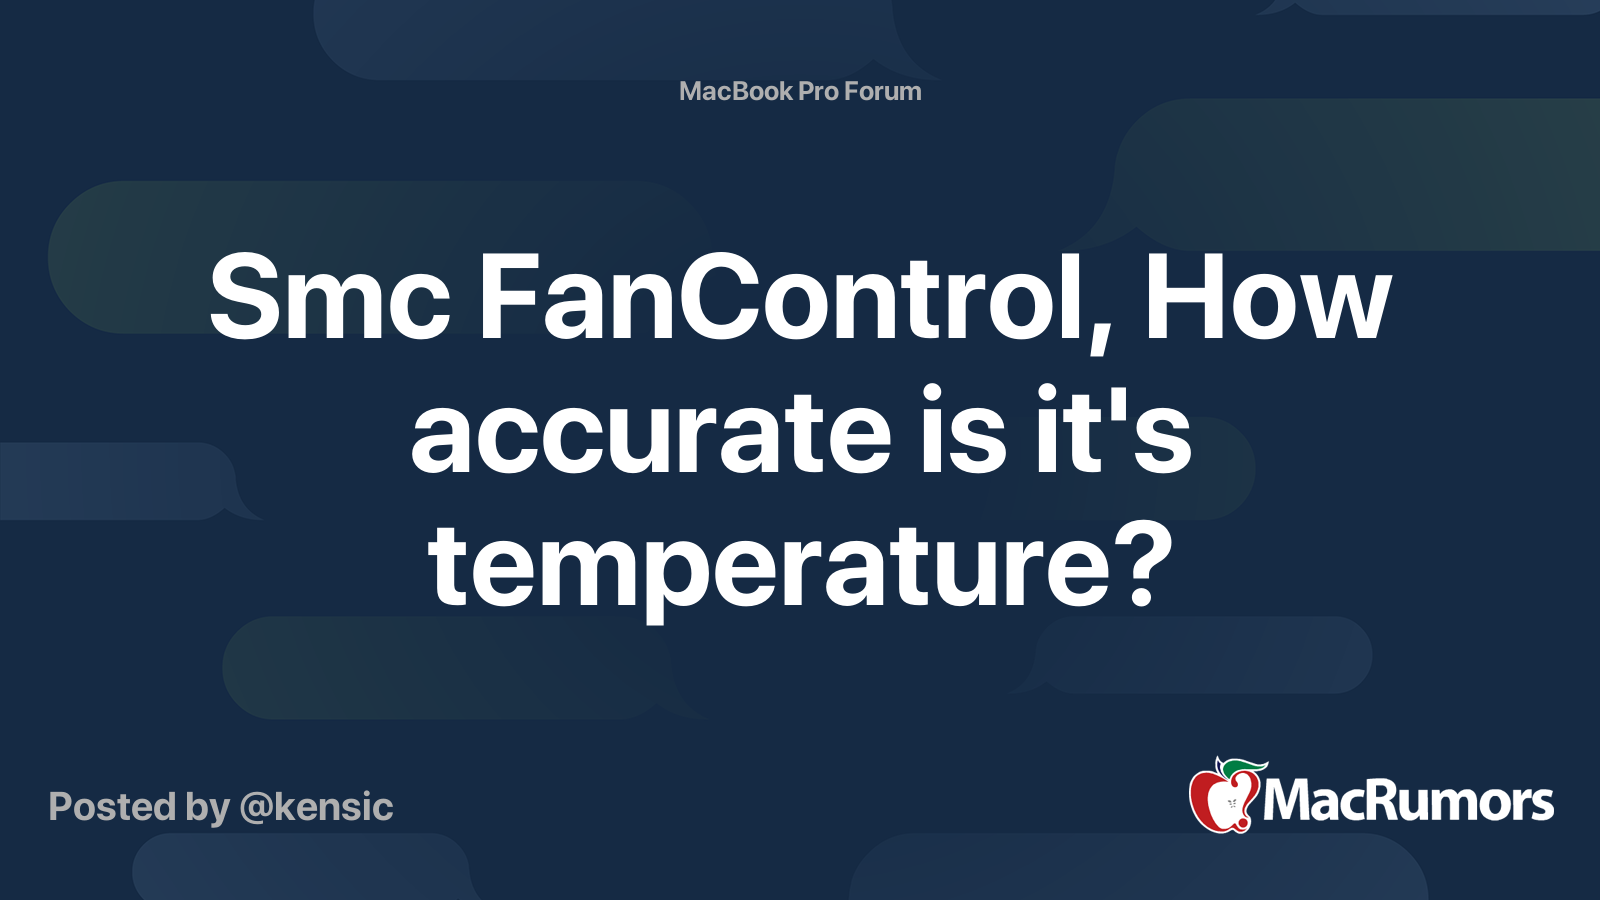 værksted skat Mundskyl Smc FanControl, How accurate is it's temperature? | MacRumors Forums